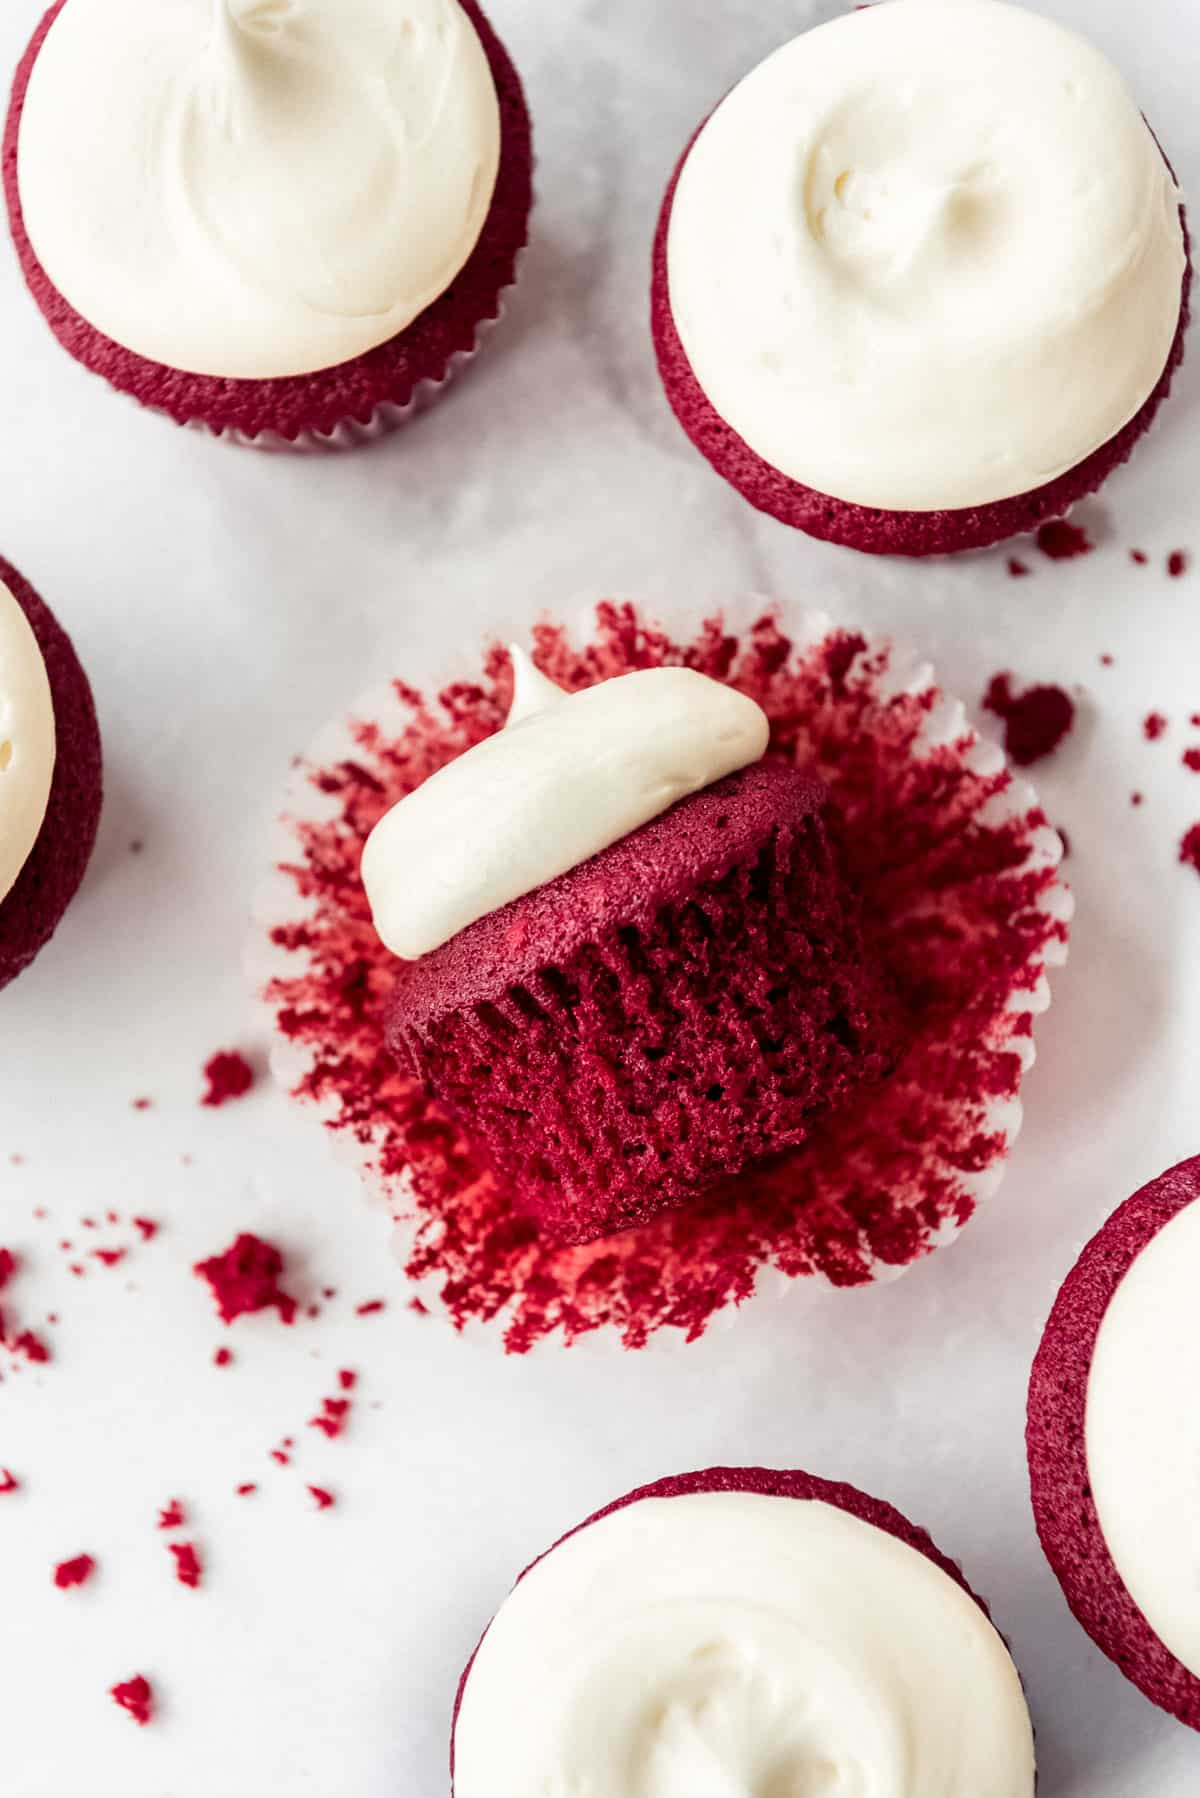 Overhead image of red velvet cupcakes with frosting on marble counter, one cupcake on it's side.